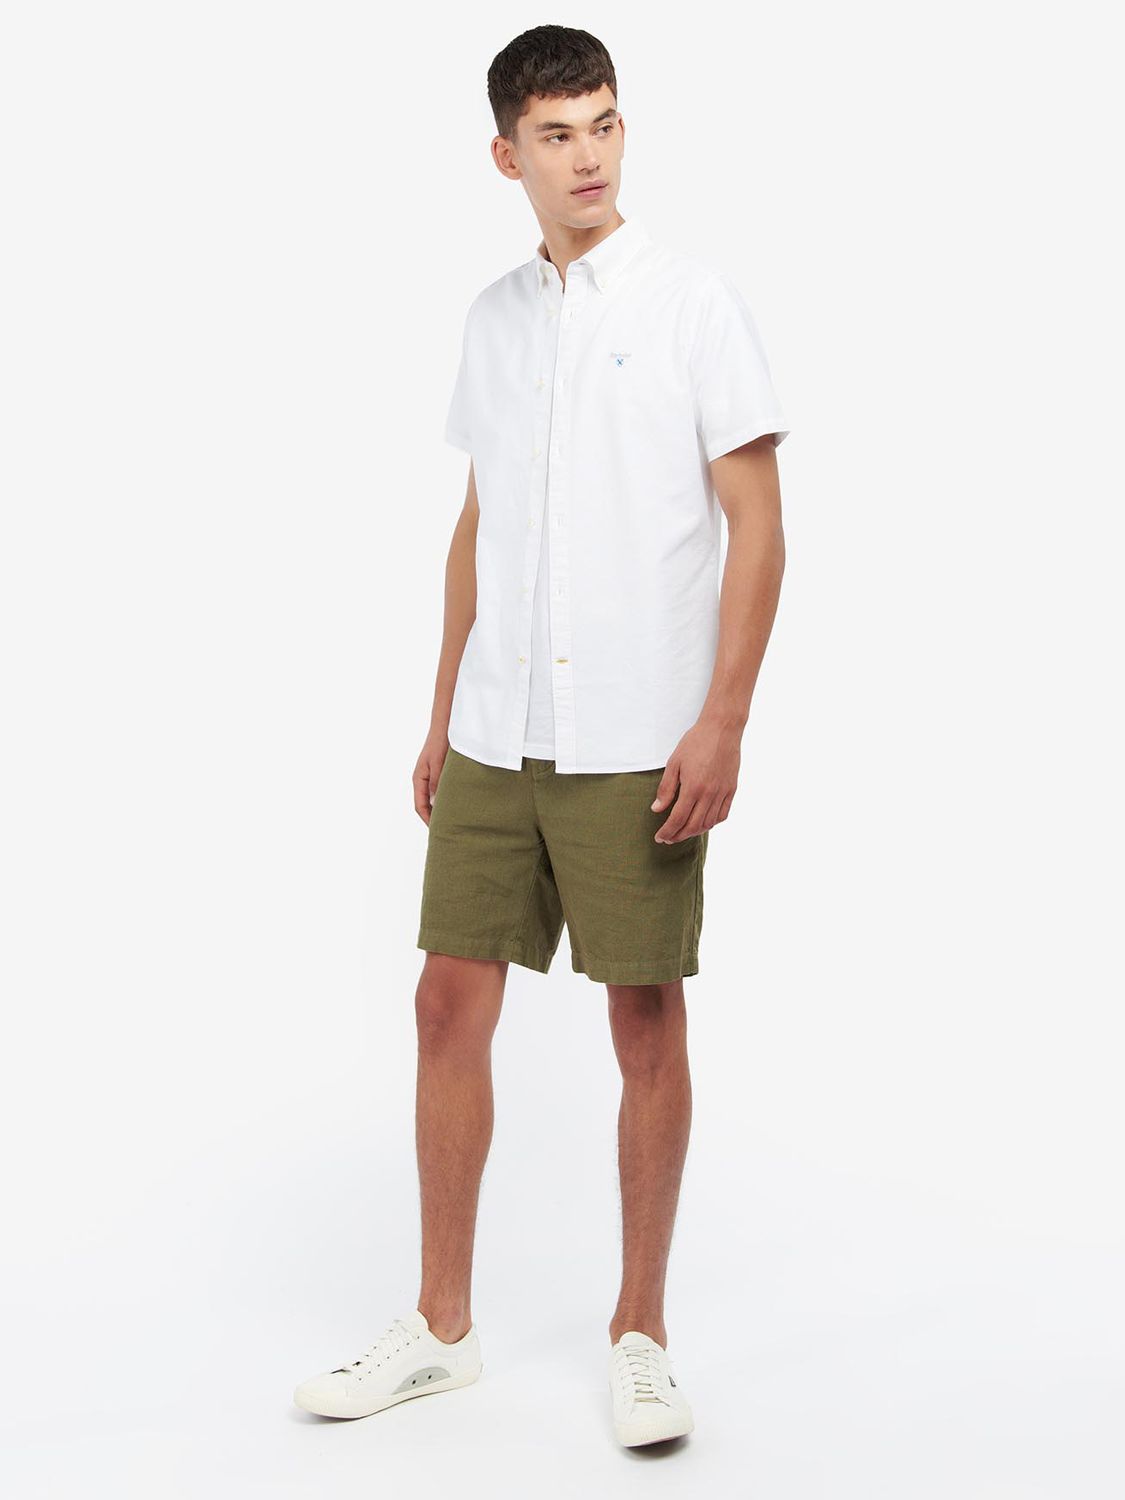 Barbour Oxford Cotton Short Sleeve Shirt, White at John Lewis & Partners